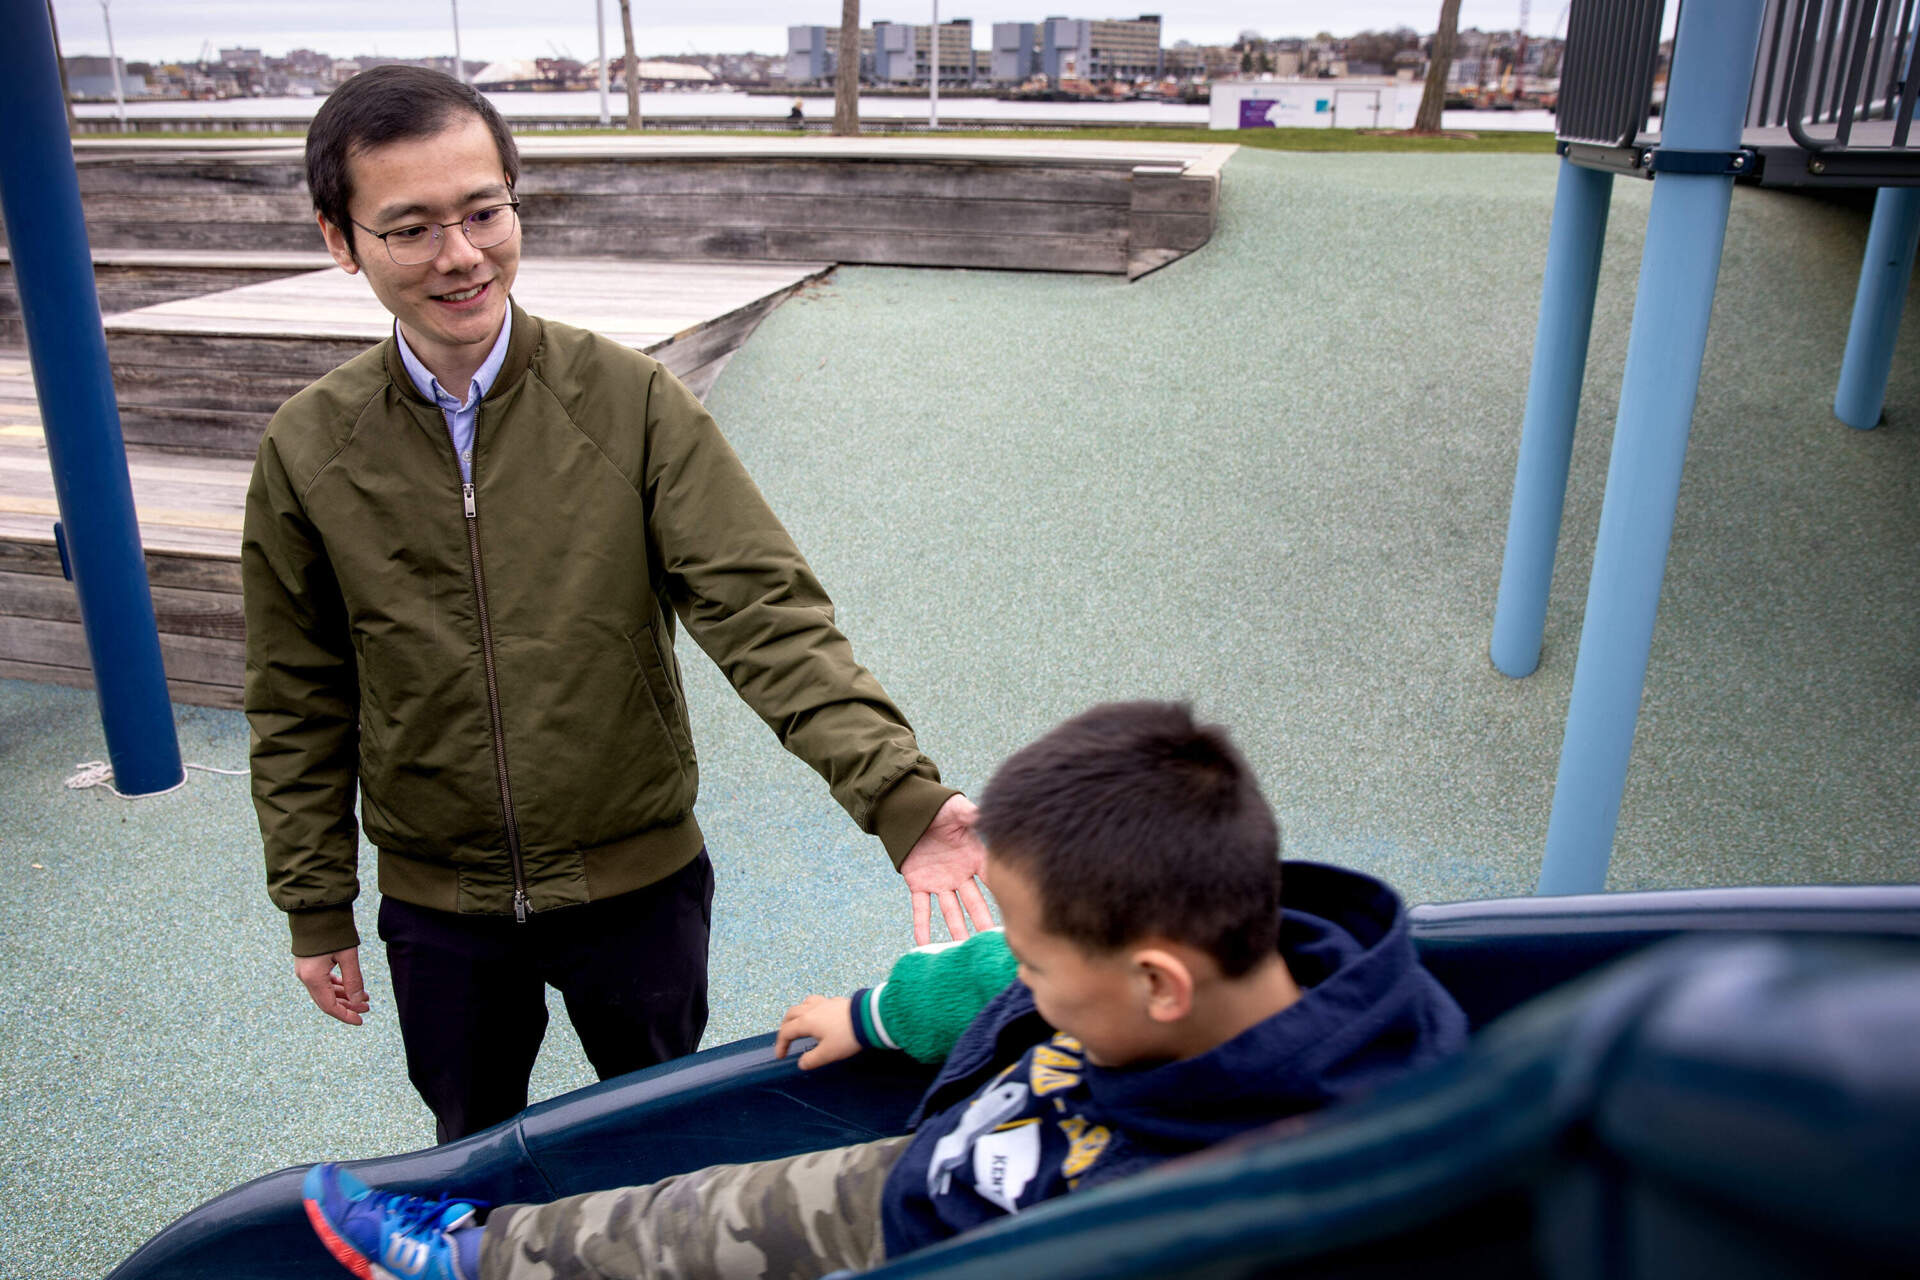 Yang Cao watches as his son Zhentao plays on a slide at Menino Park in Charlestown. (Robin Lubbock/WBUR)